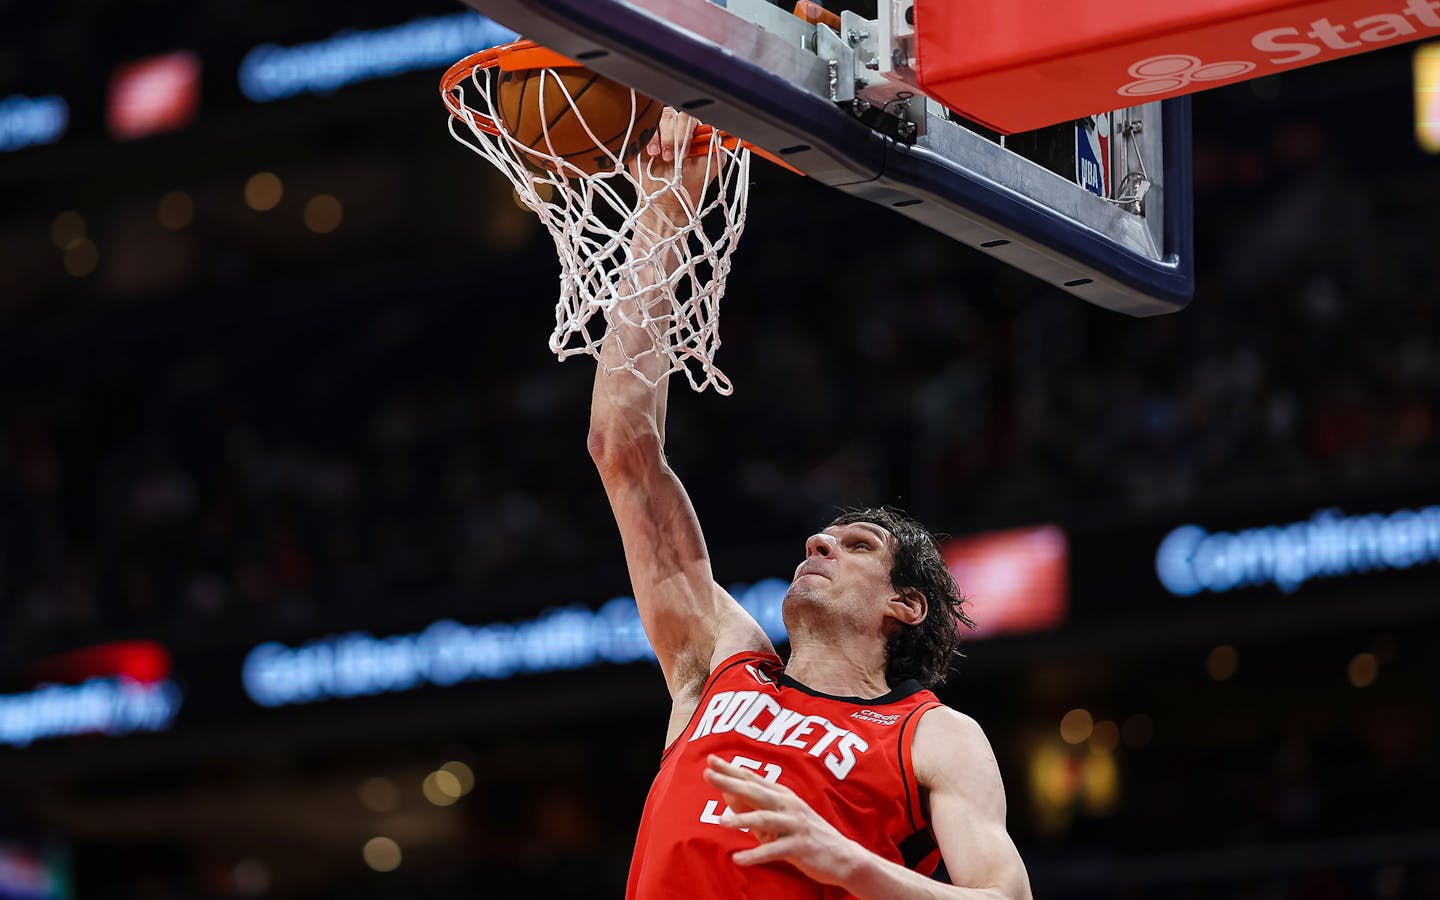 NBA REACT - Top 10 Largest Hand Size in NBA history: 1. Boban